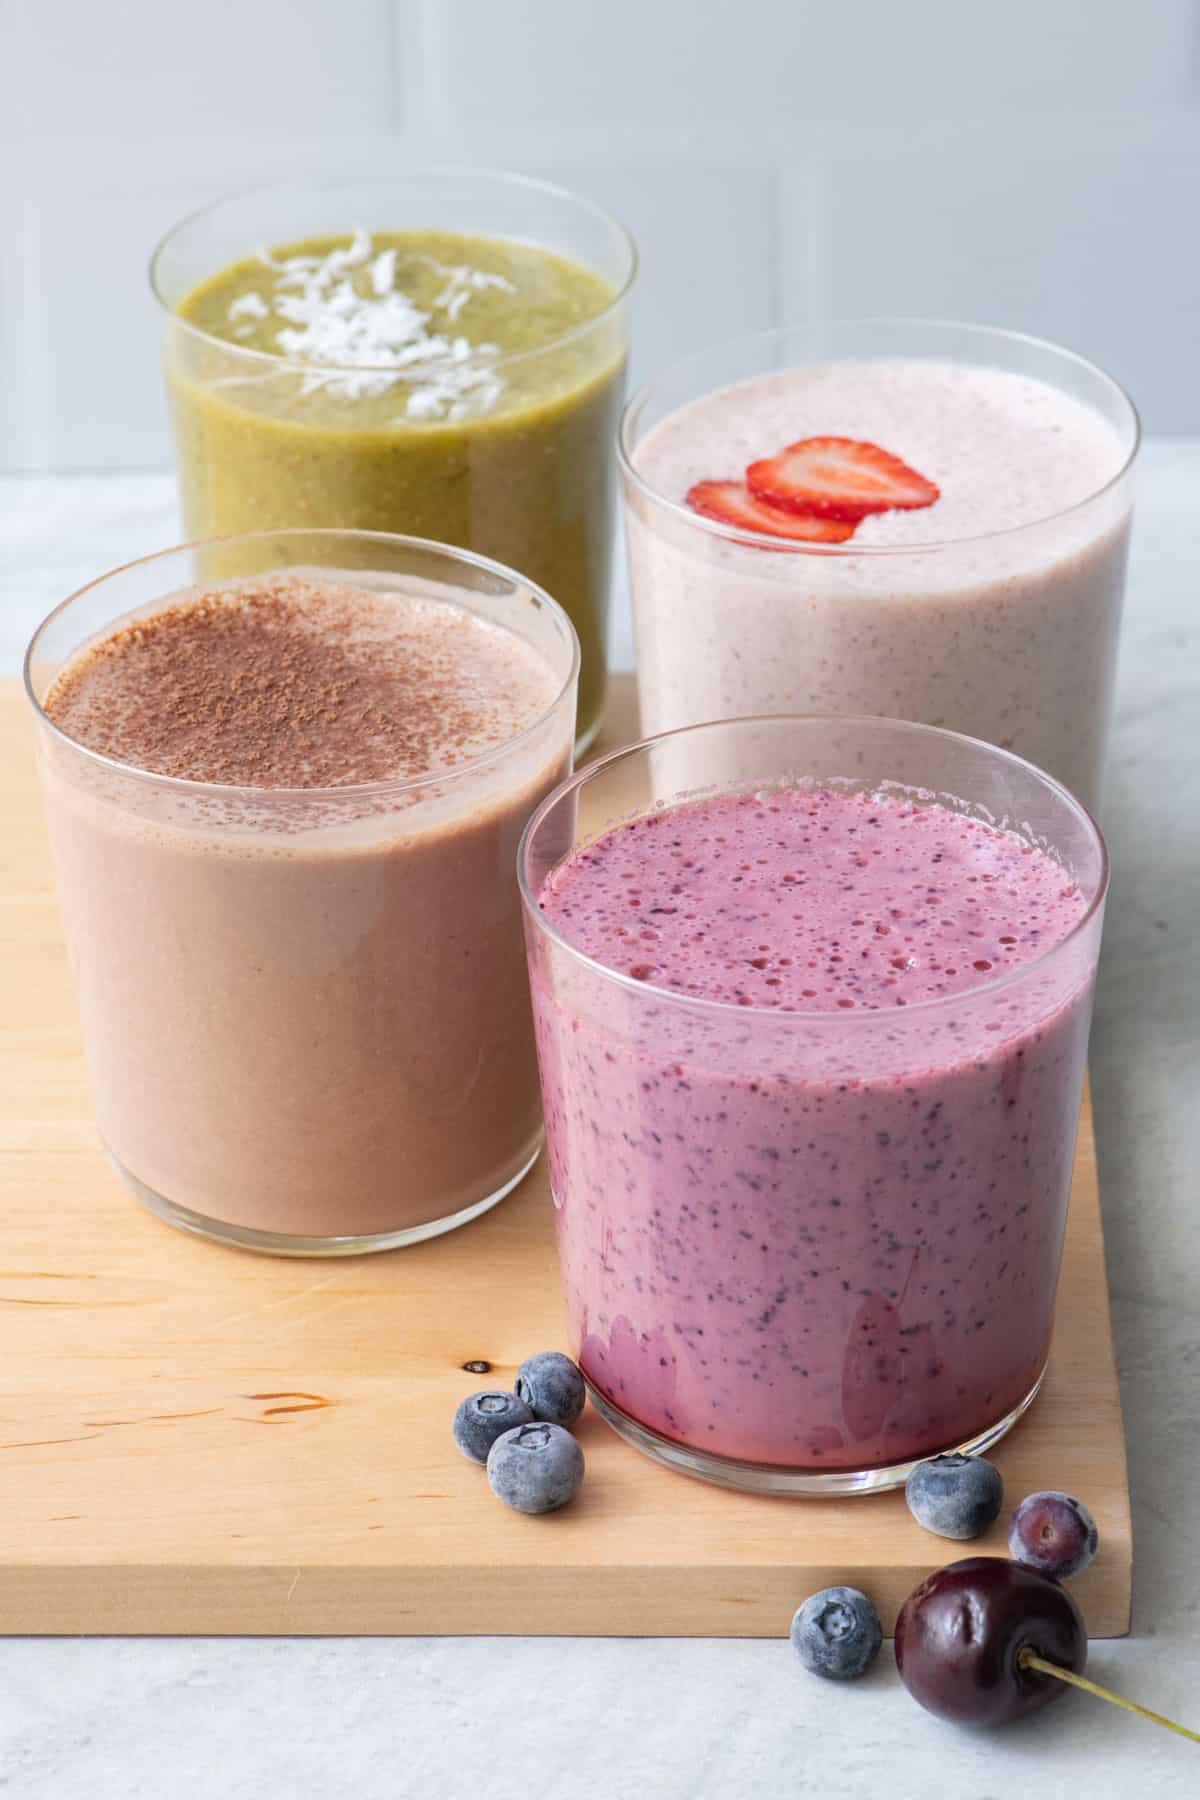 https://feelgoodfoodie.net/wp-content/uploads/2022/08/Freezer-Smoothie-Packs-18.jpg